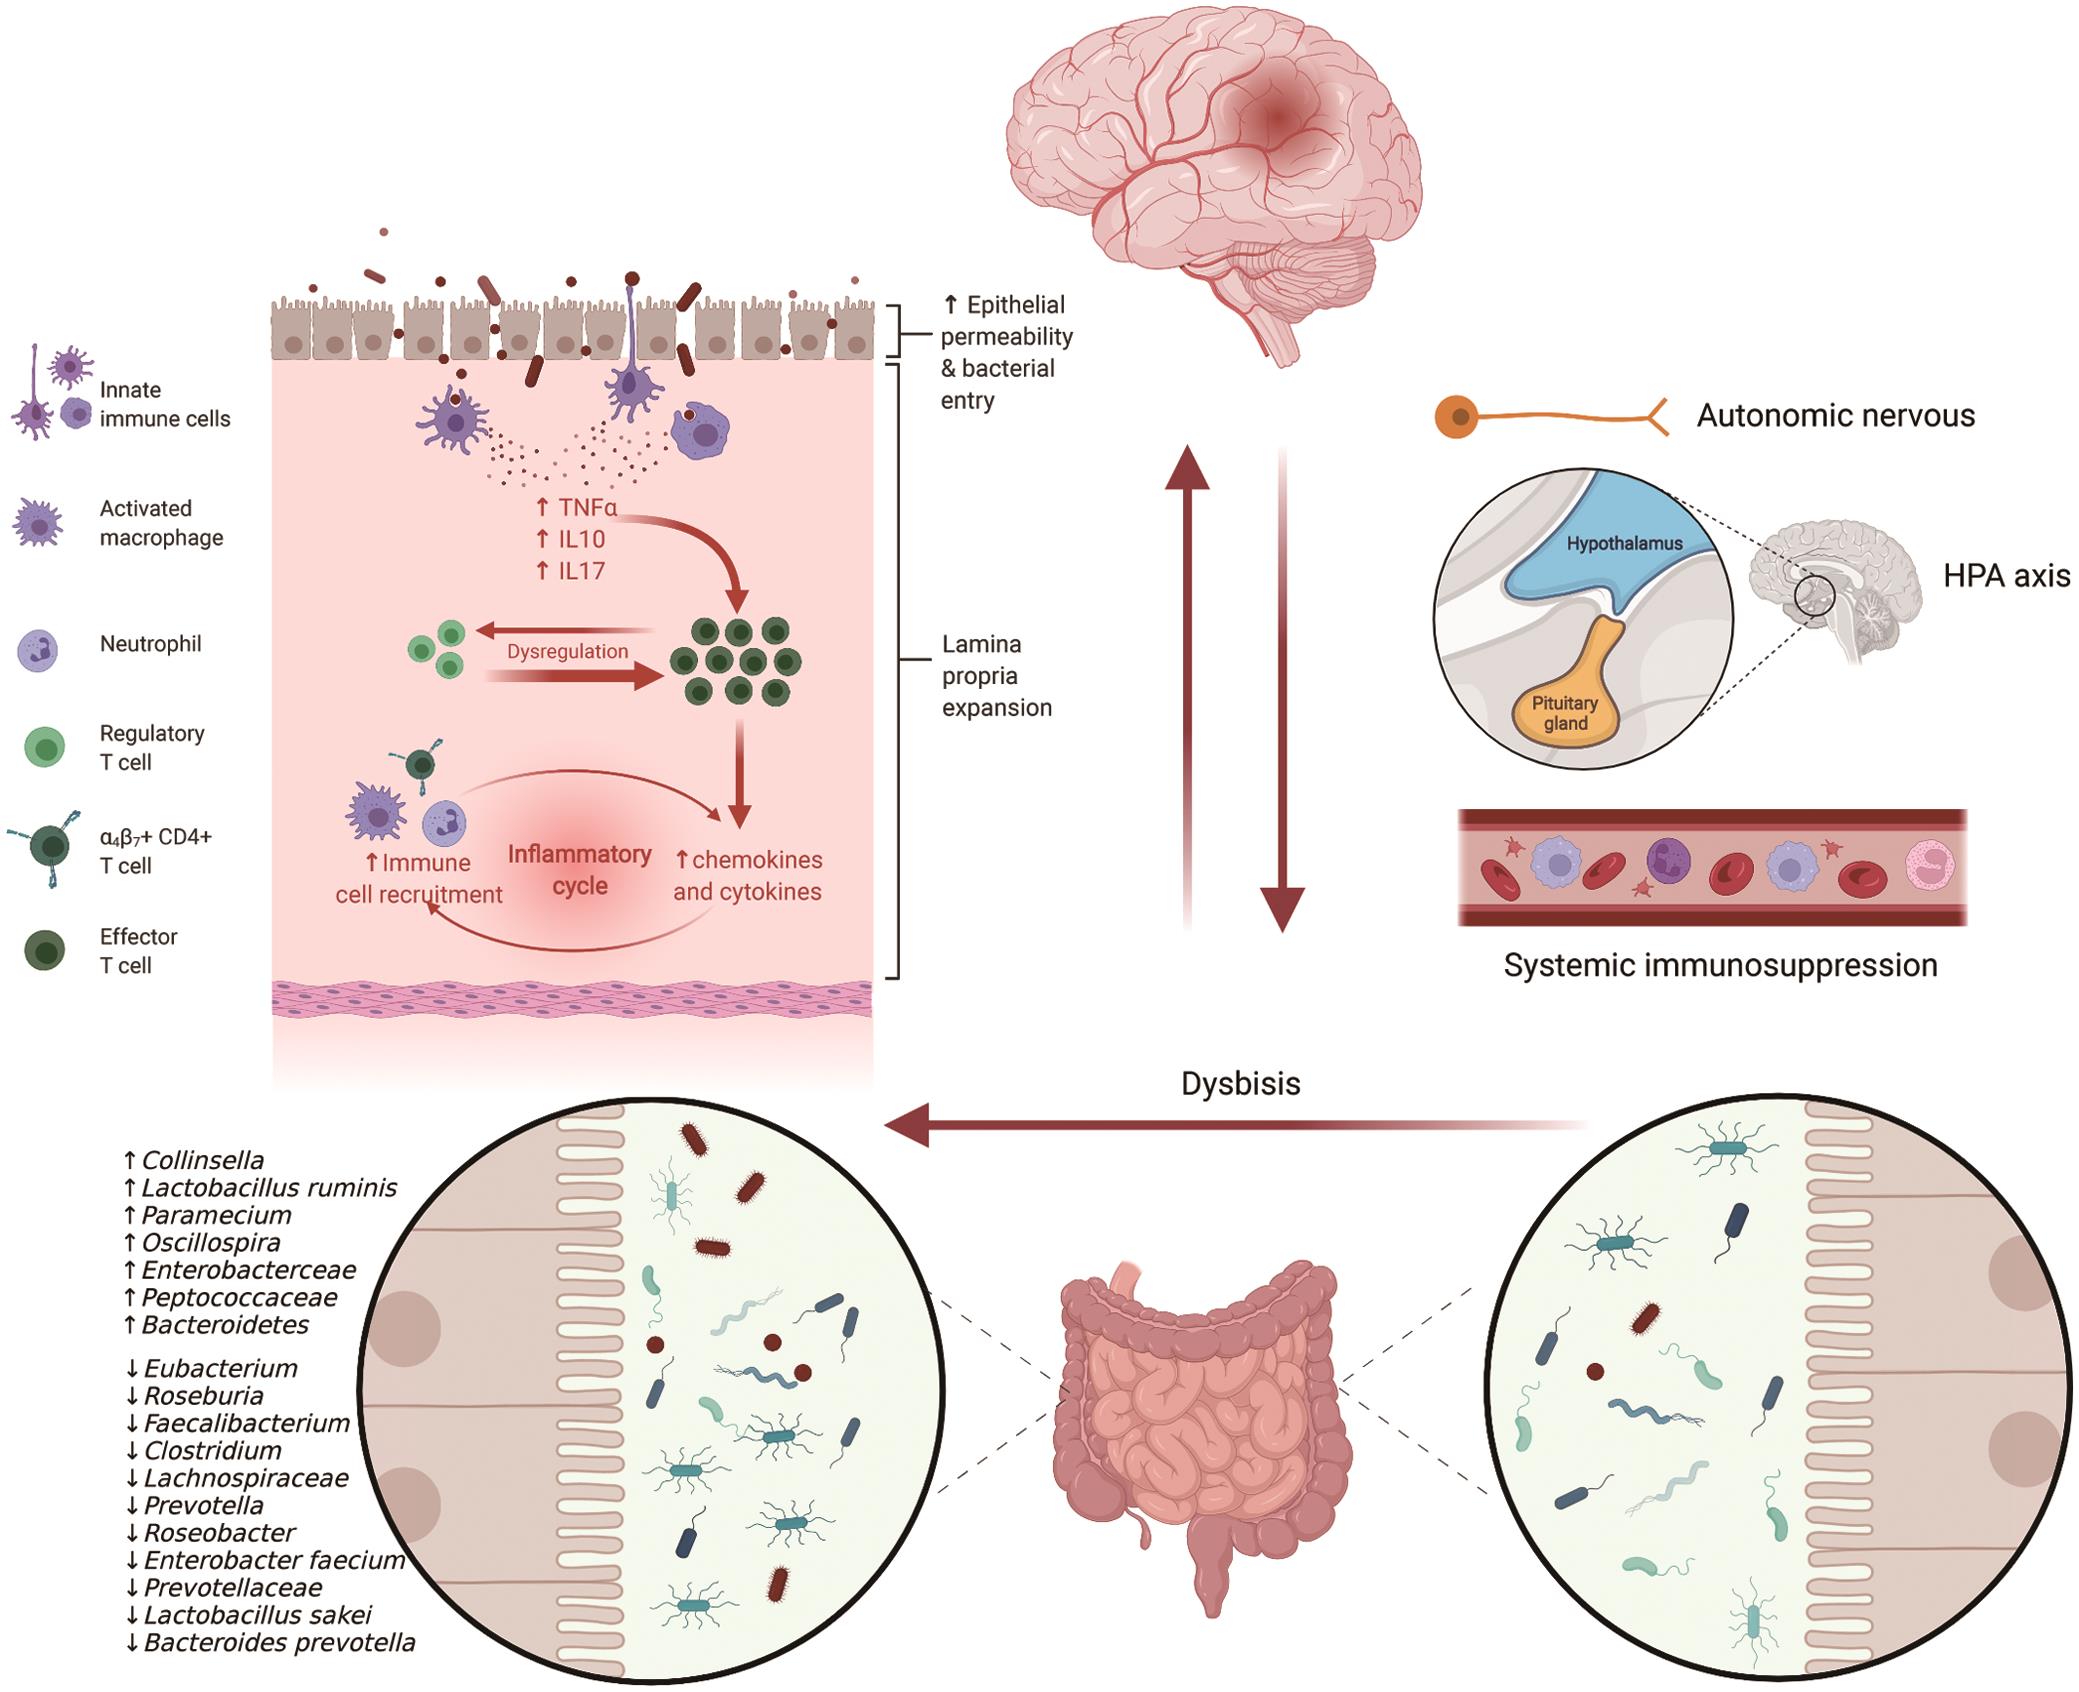 The interaction between gut microbiota and ischemic stroke.